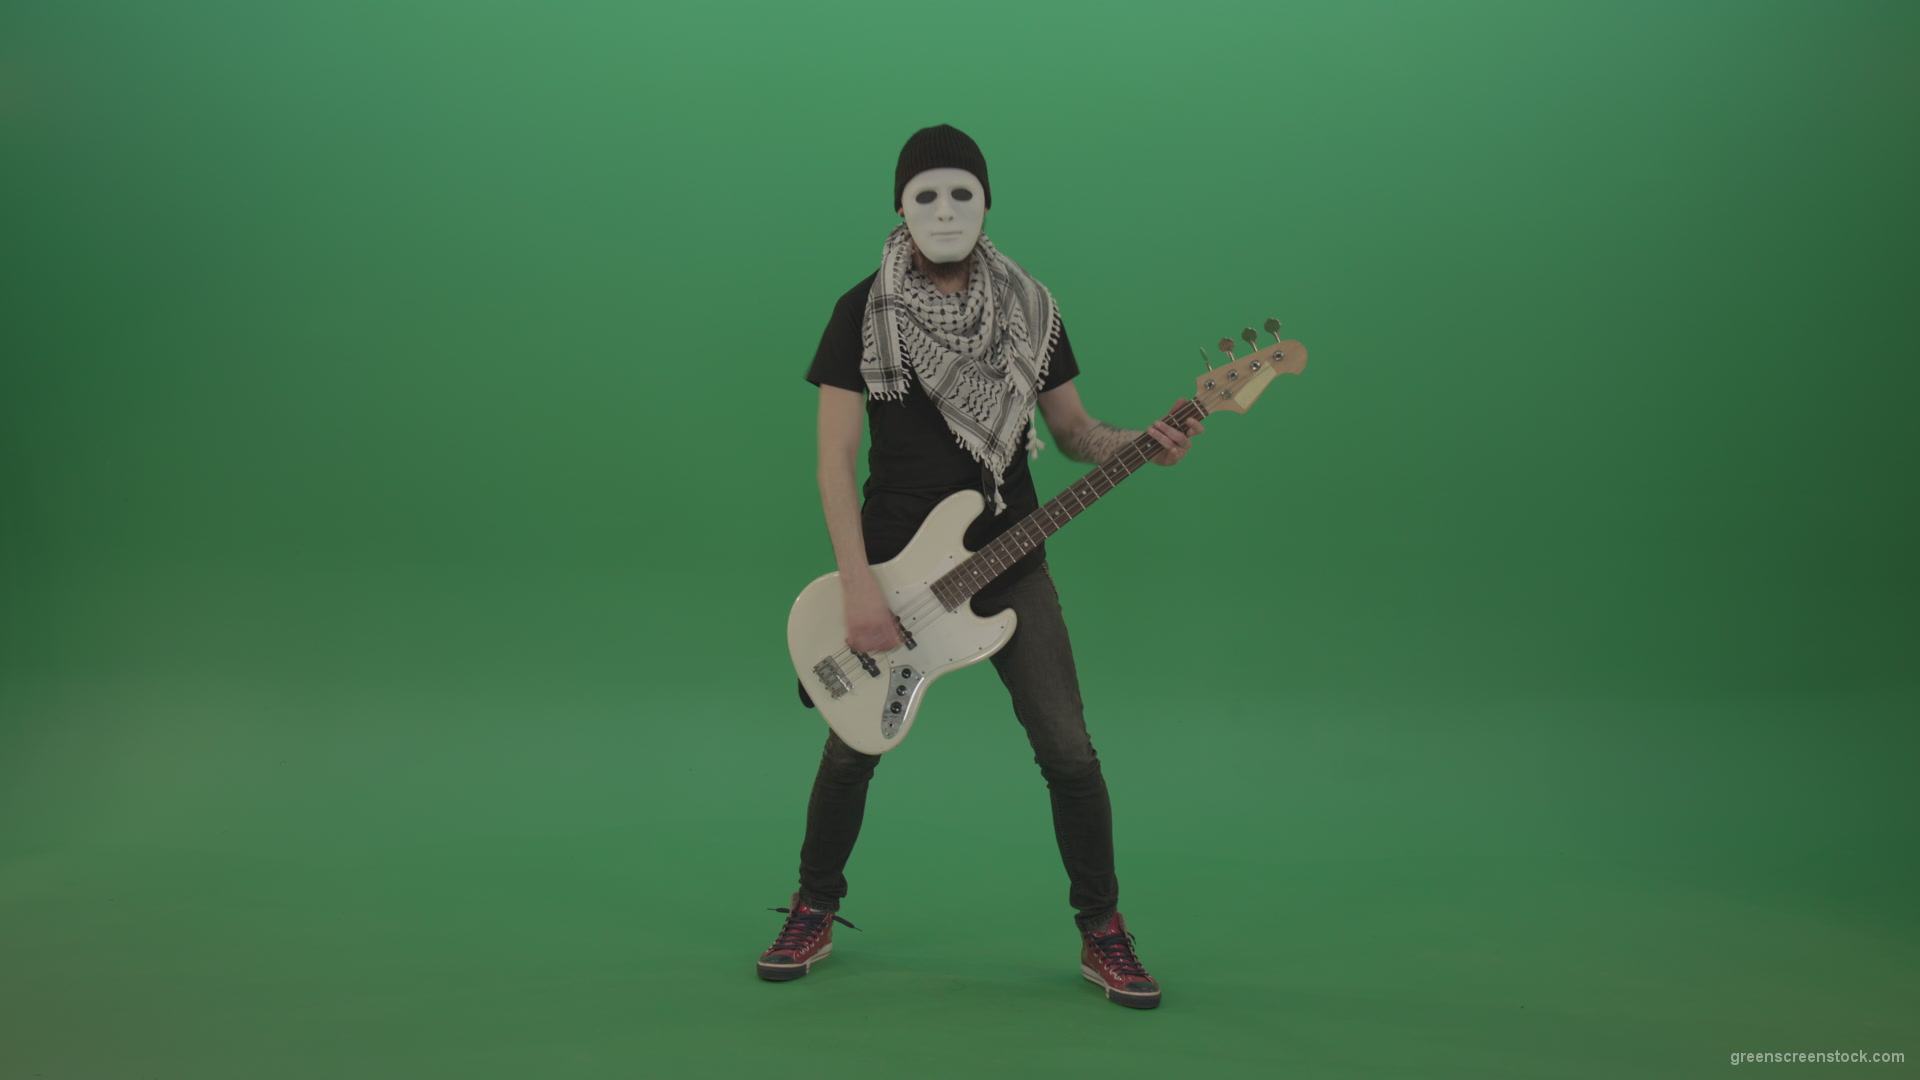 Bass-guitaris-in-full-size-play-white-guitar-in-white-mask-on-chromakey-green-screen_009 Green Screen Stock